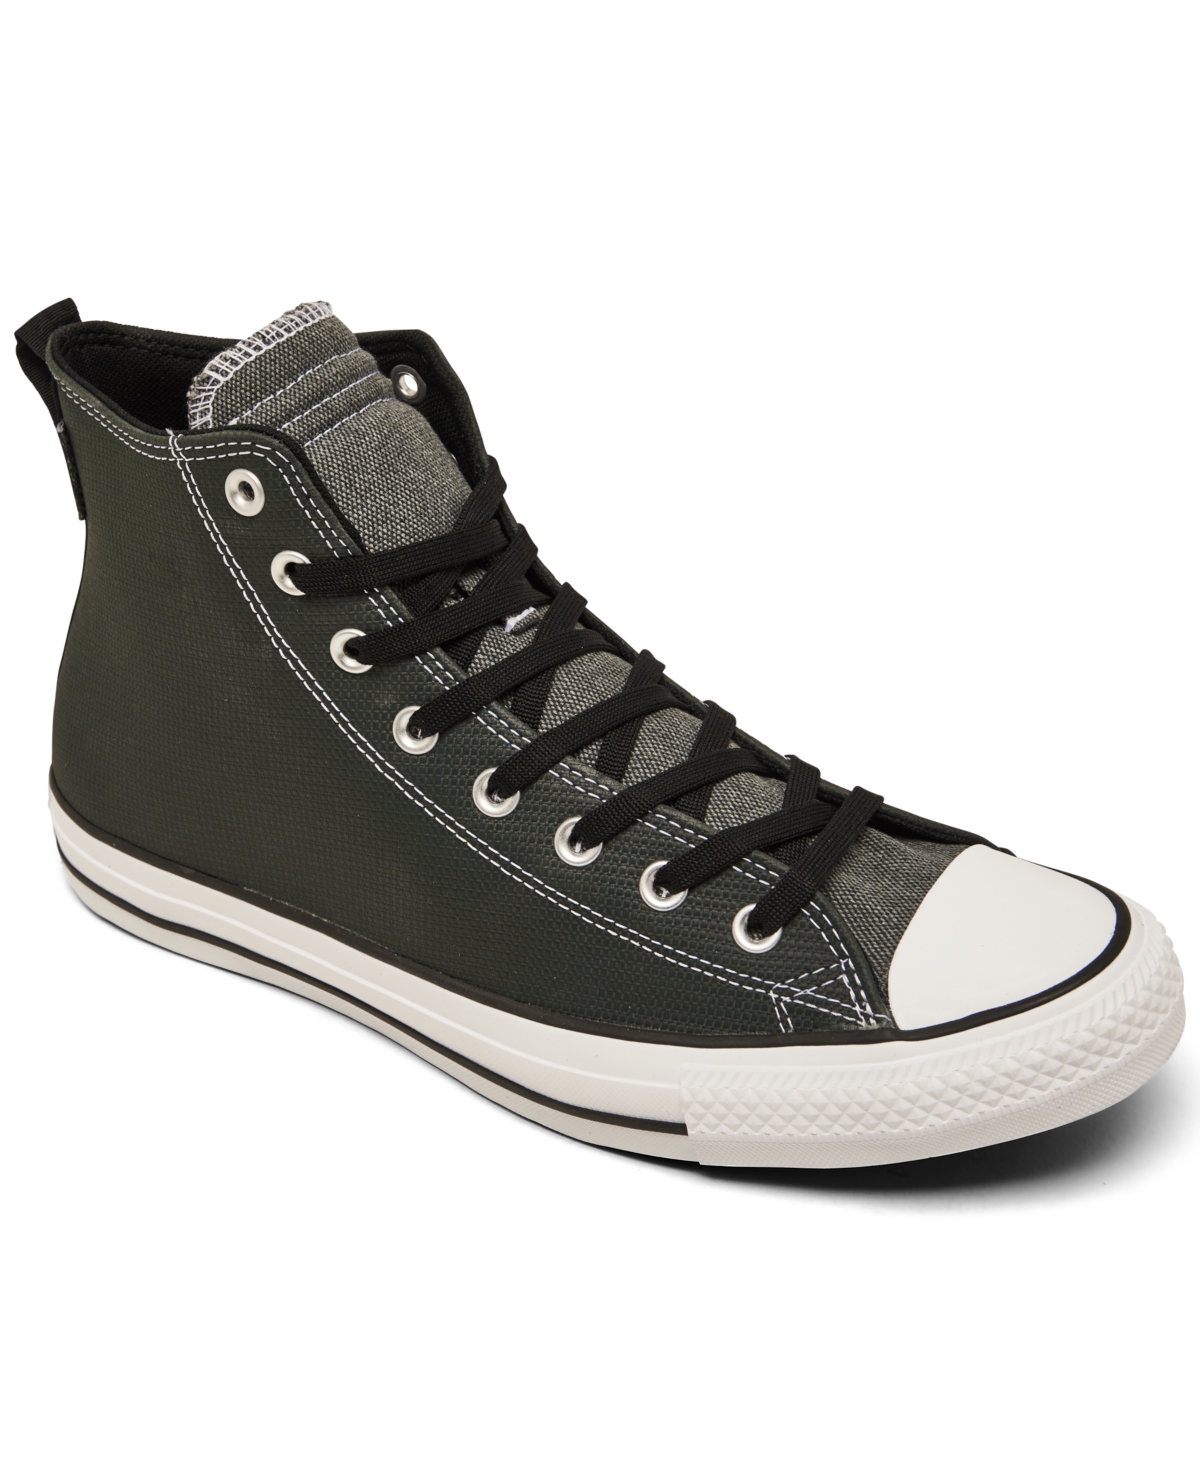 Converse Men's Chuck Taylor All Star Leather High Top Casual Sneakers From Finish Line In Secret Pines,black